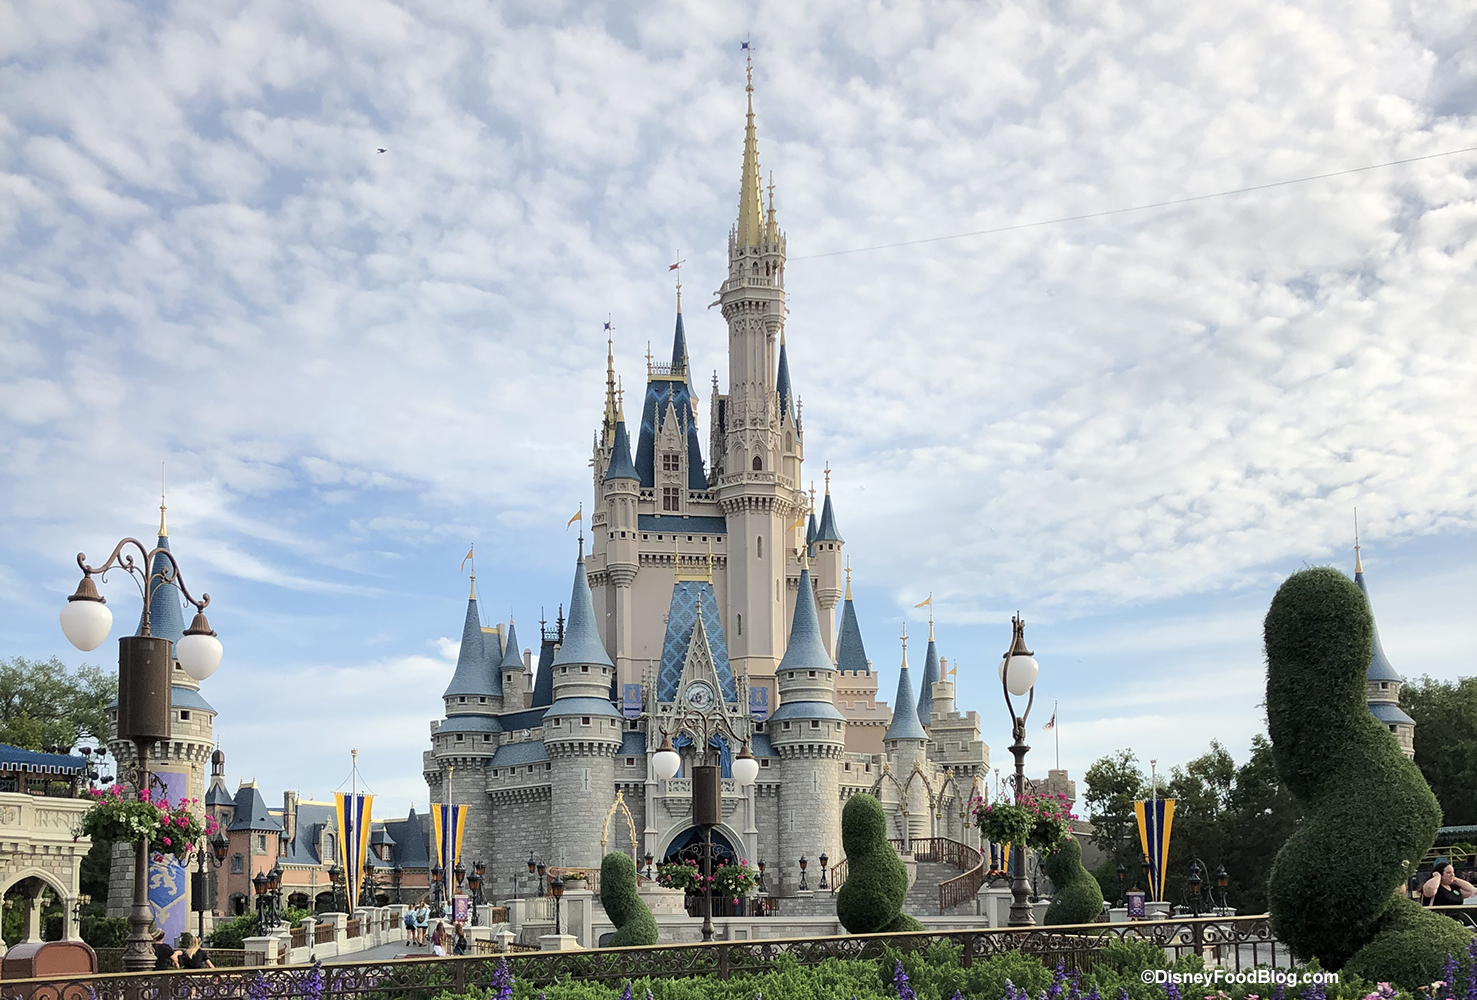 Cinderella Castle in Disney World Is Nearly Complete! Take a Look at